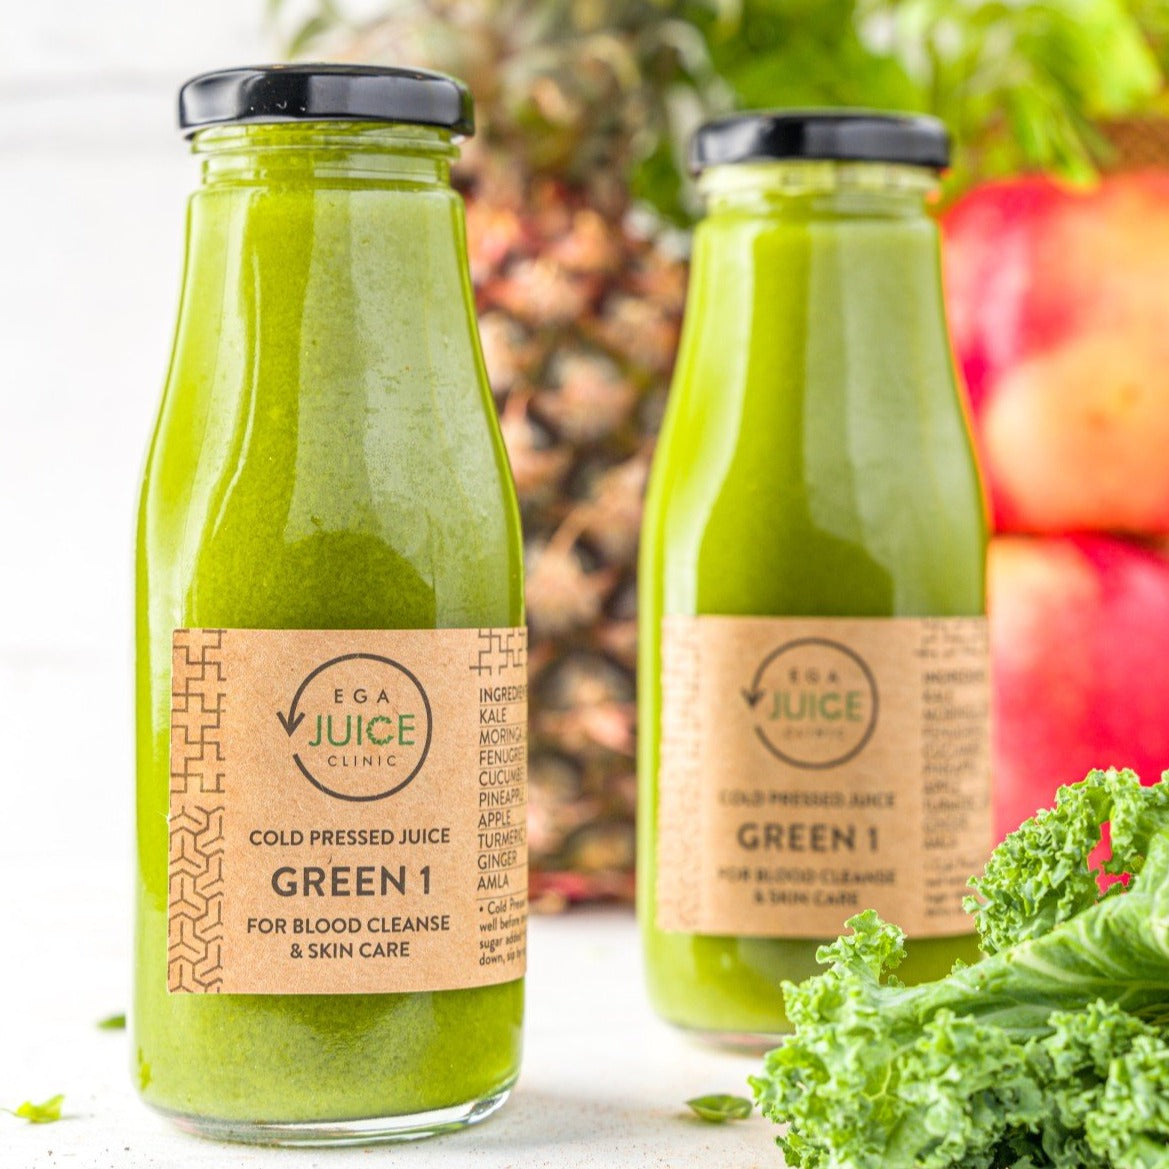 Green 1 Juice - Blood Cleanse & Skin Care